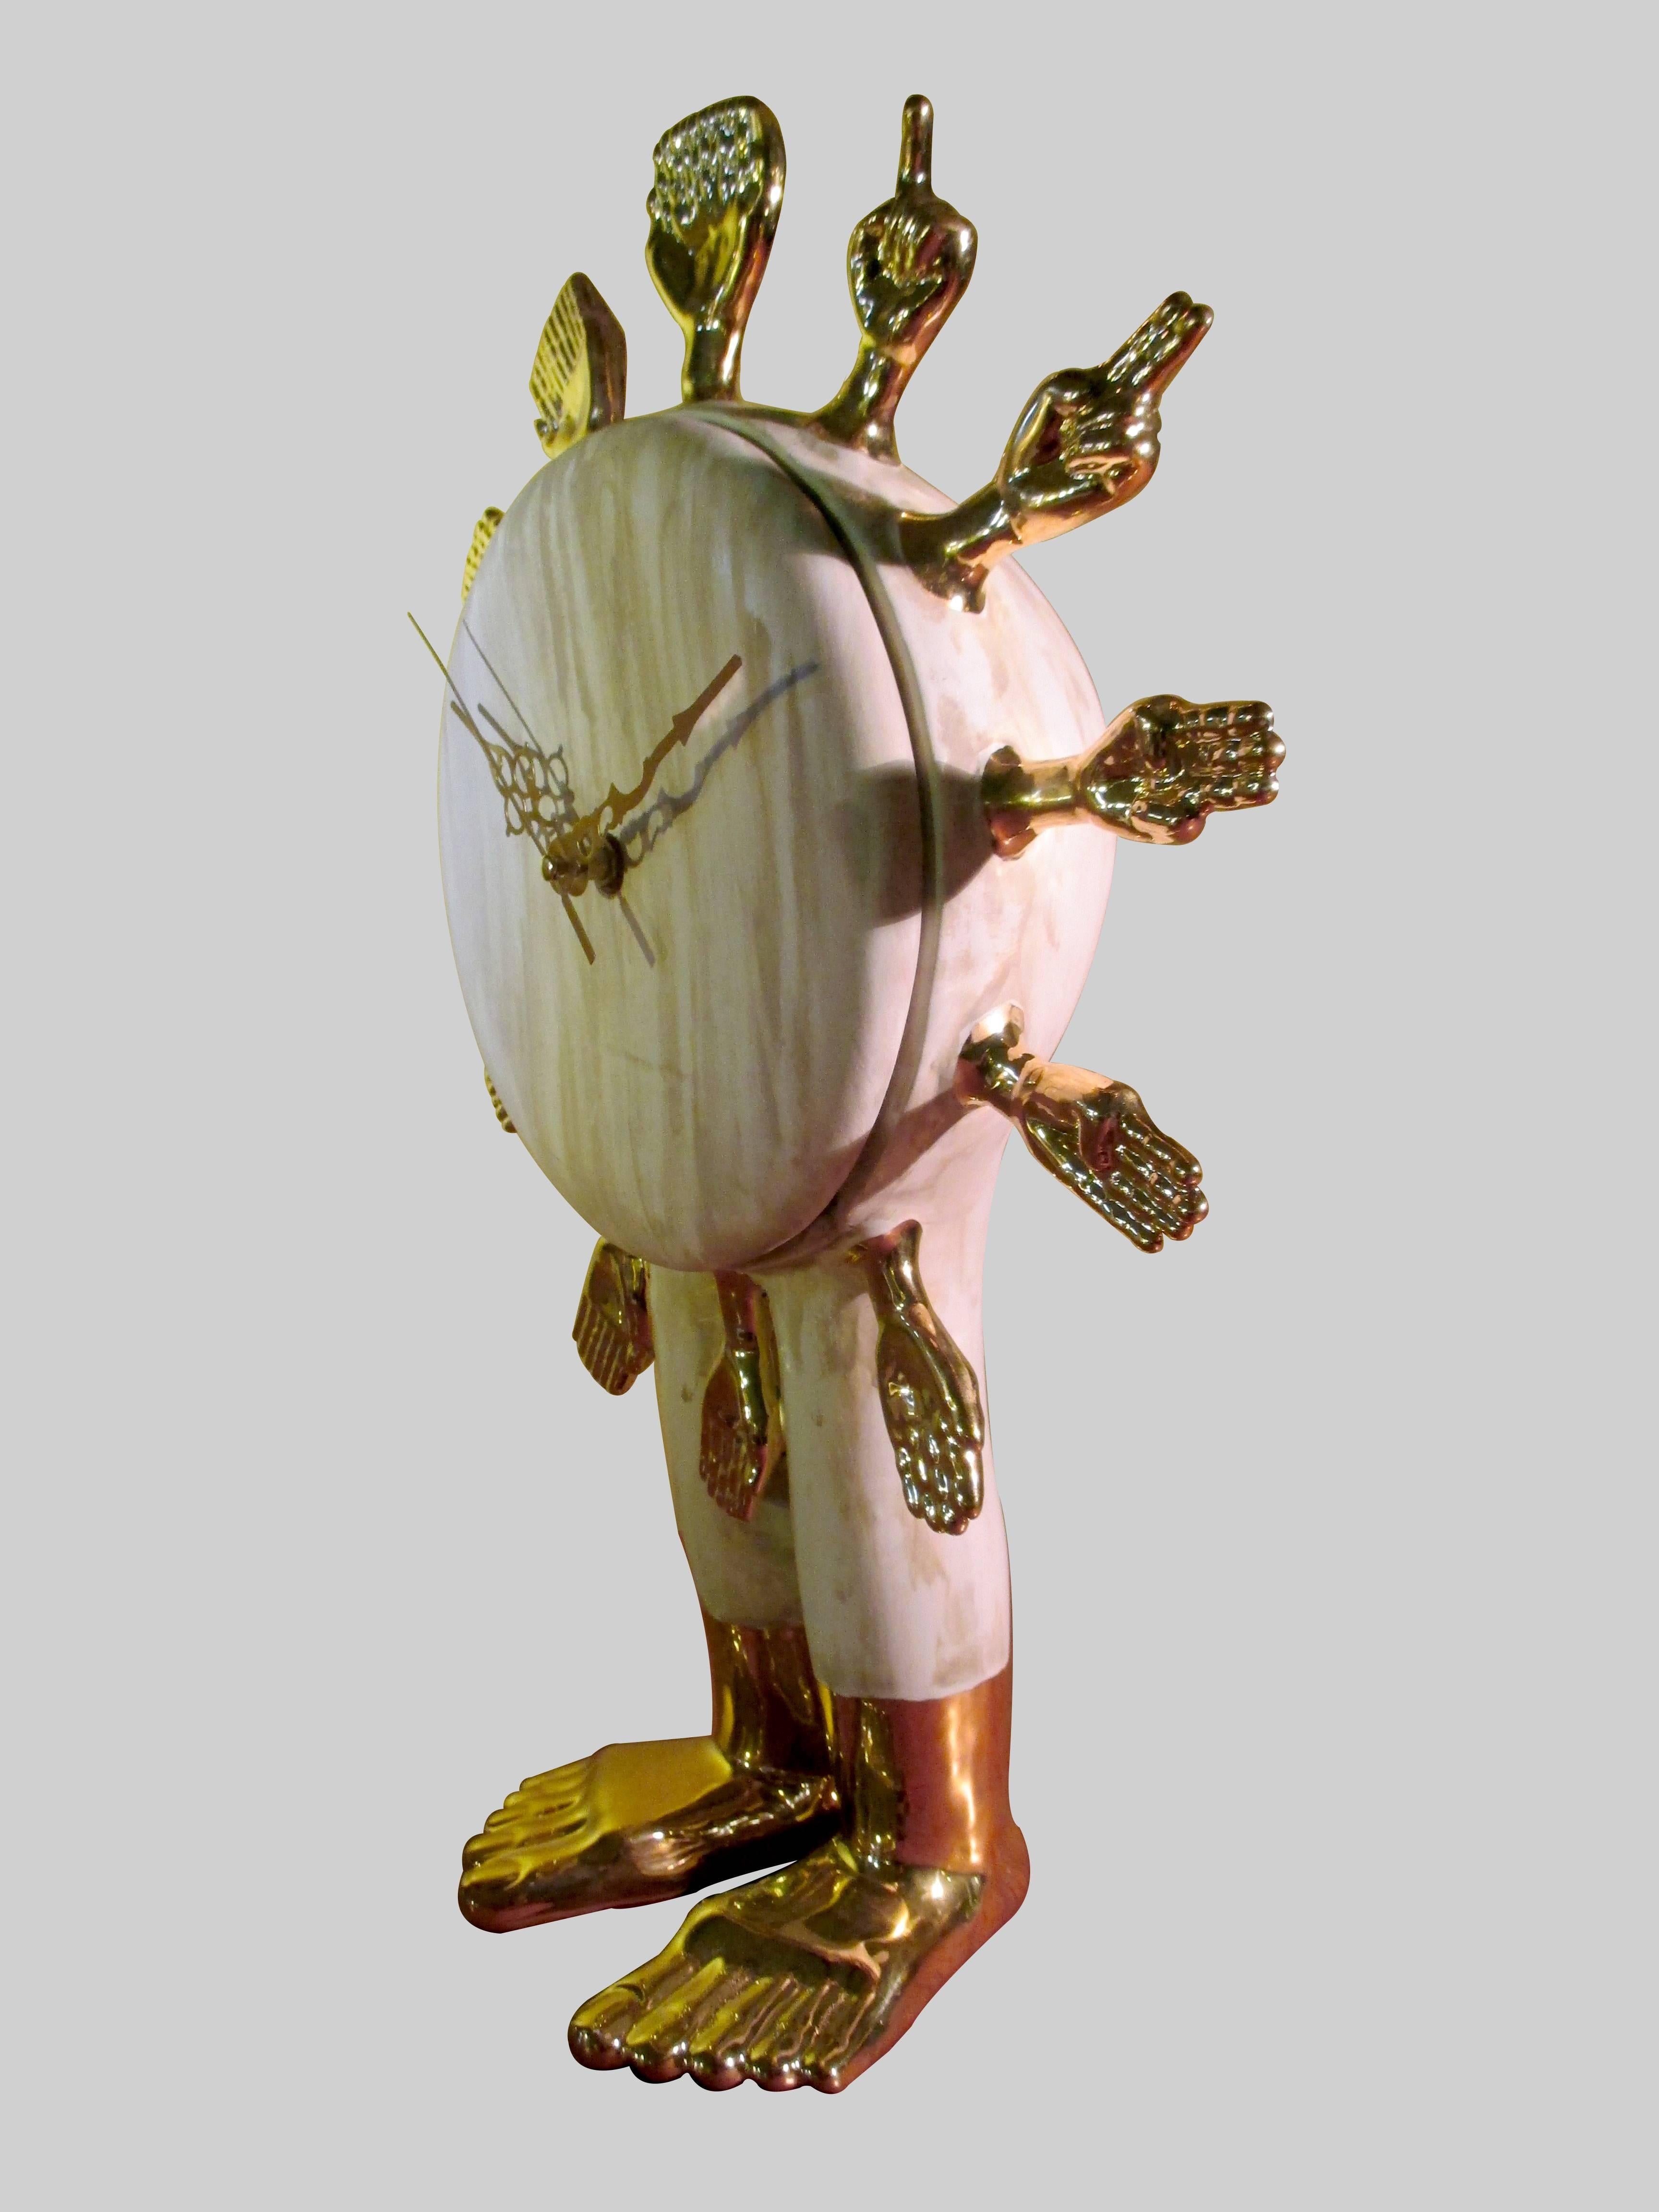 A standing clock with feet and hands by Pedro Friedeberg. Unique piece in ceramic 2015 edition. High temperature ceramic with 22-karat gold wash.